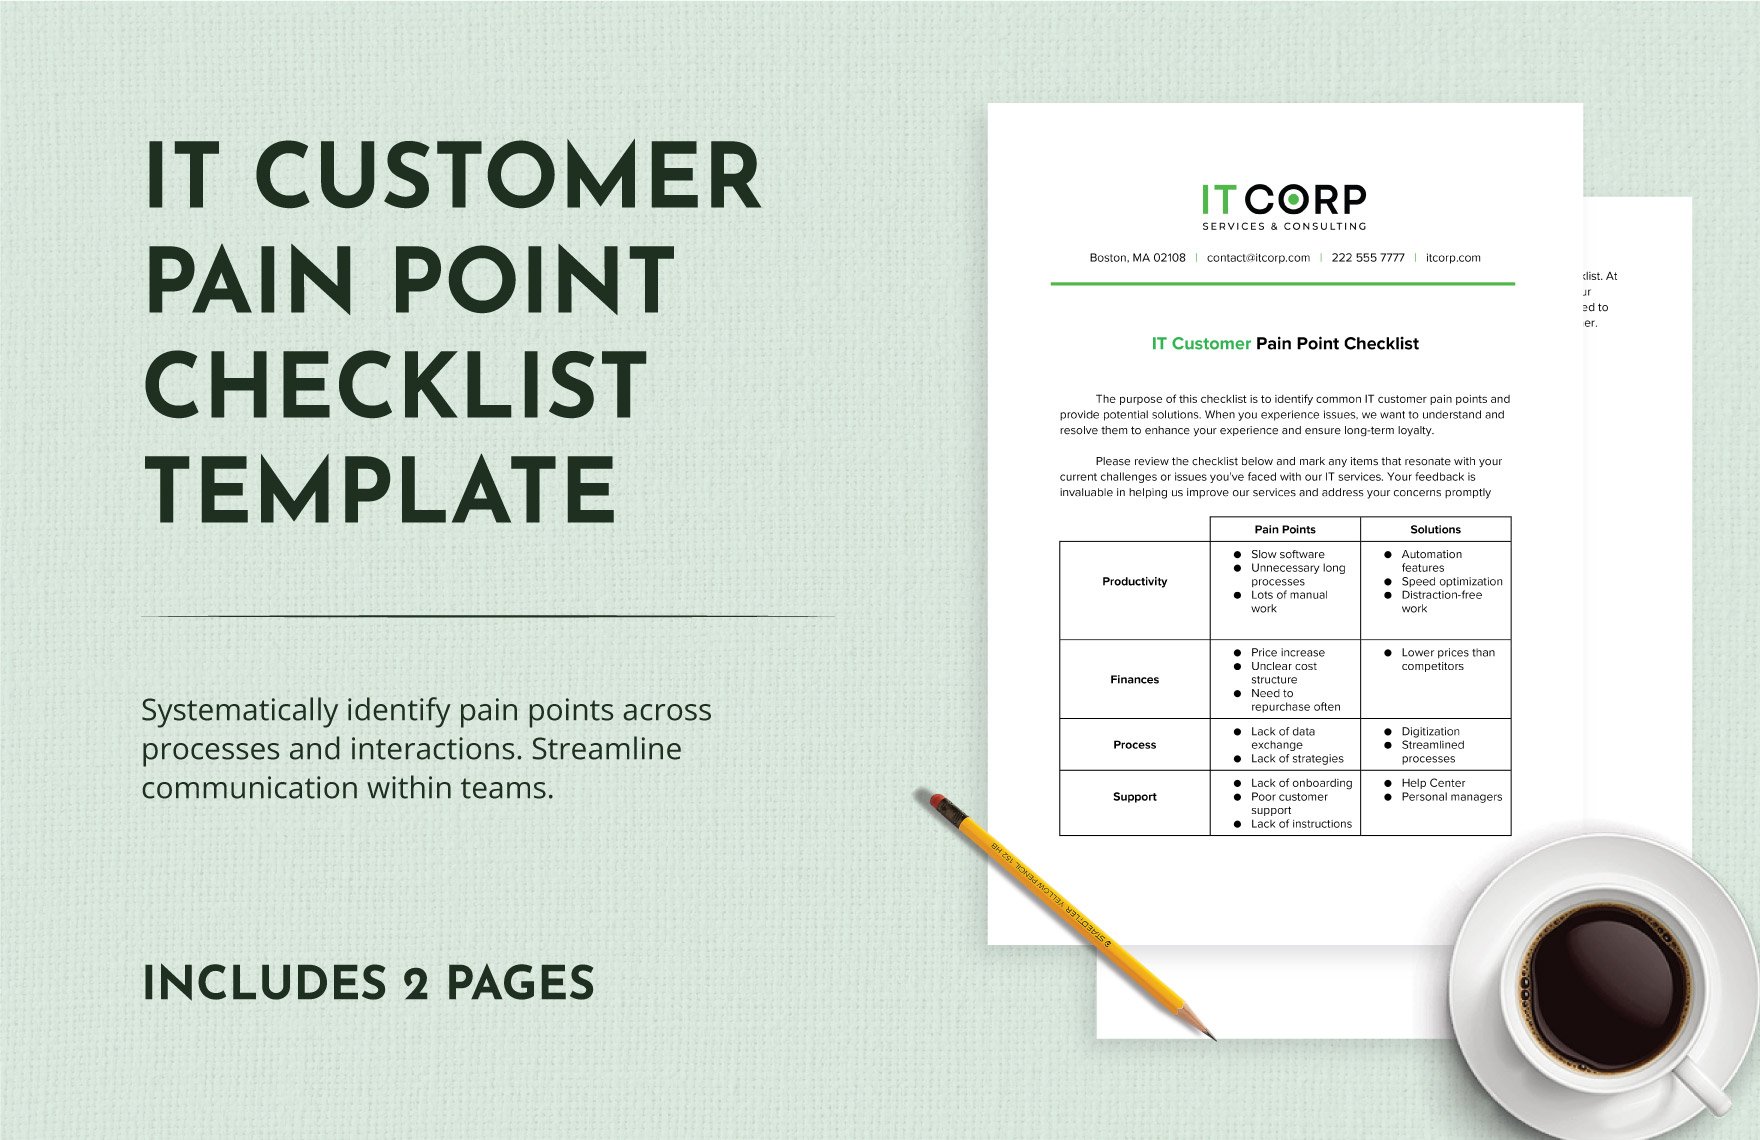 IT Customer Pain Point Checklist Template